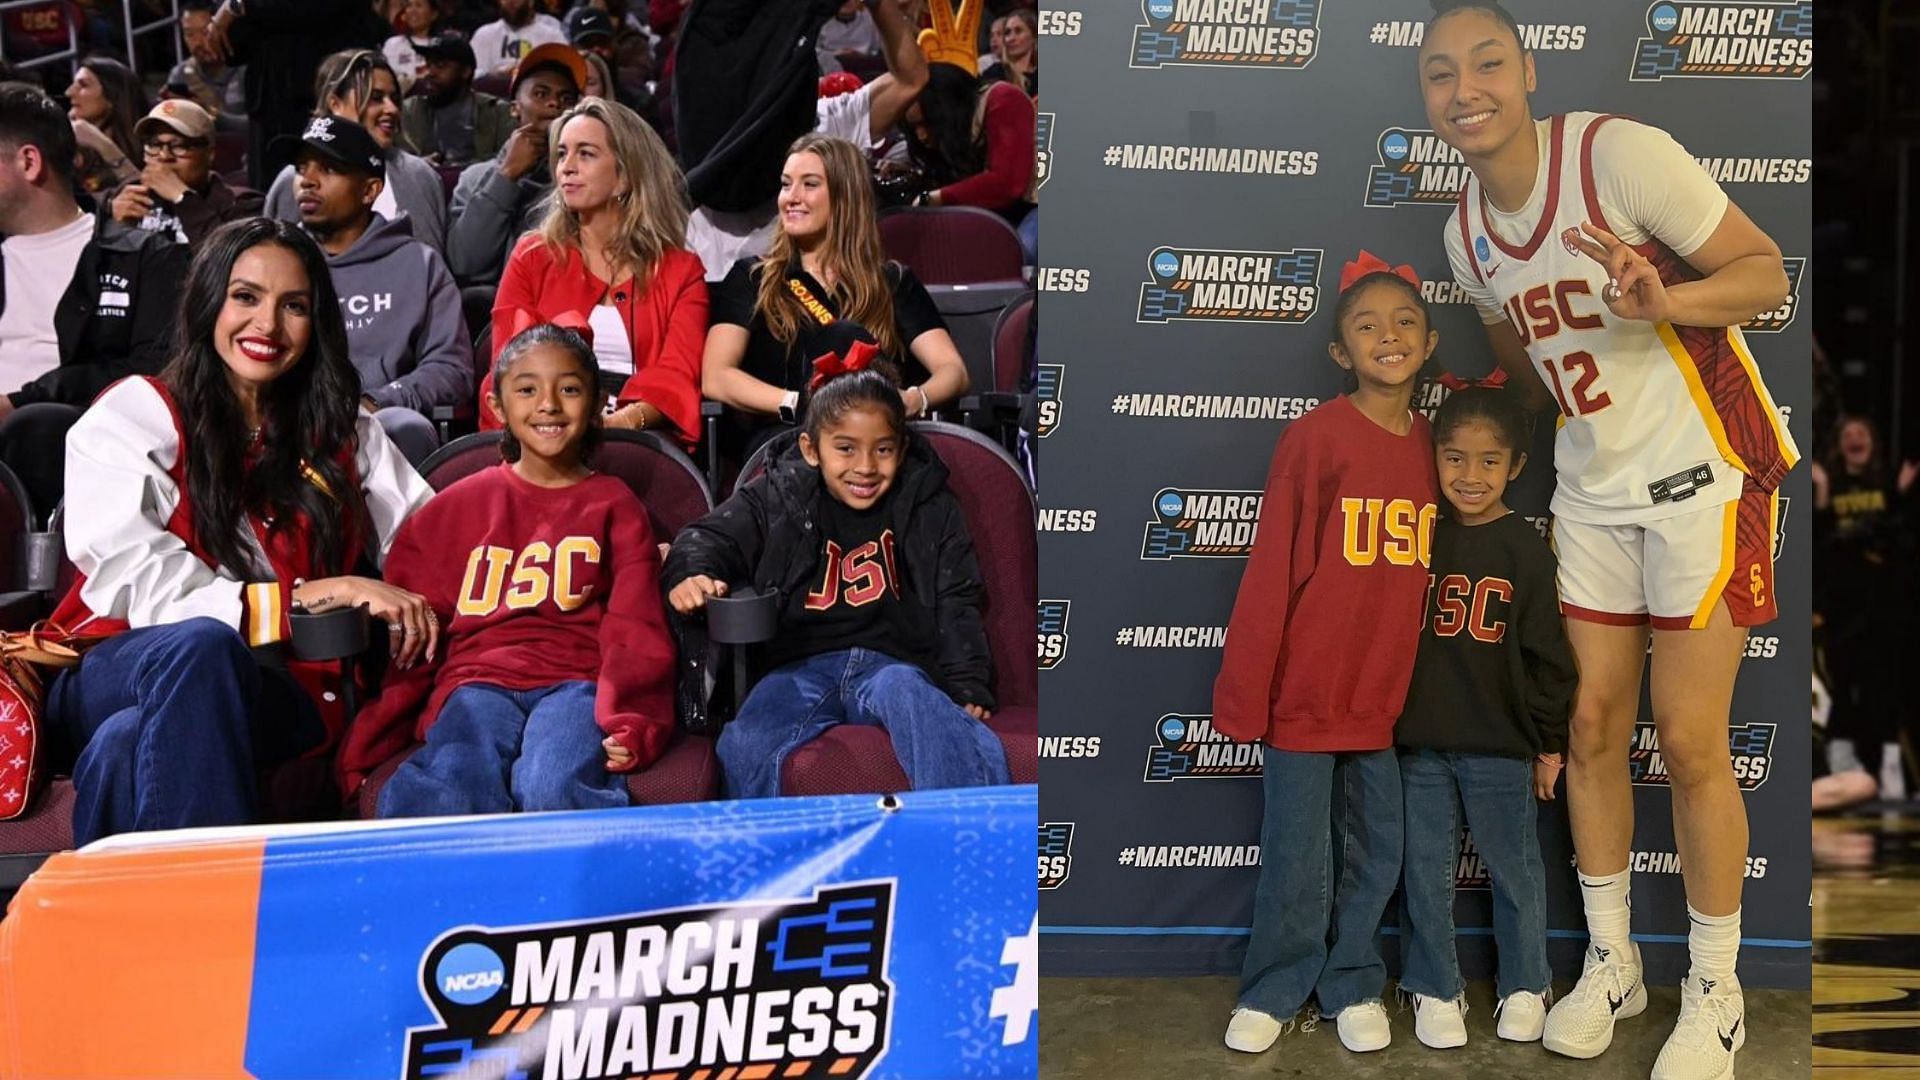 WATCH: Kobe Bryant&rsquo;s kids share special moment with USC star JuJu Watkins after stellar win against Texas A&amp;M-CC